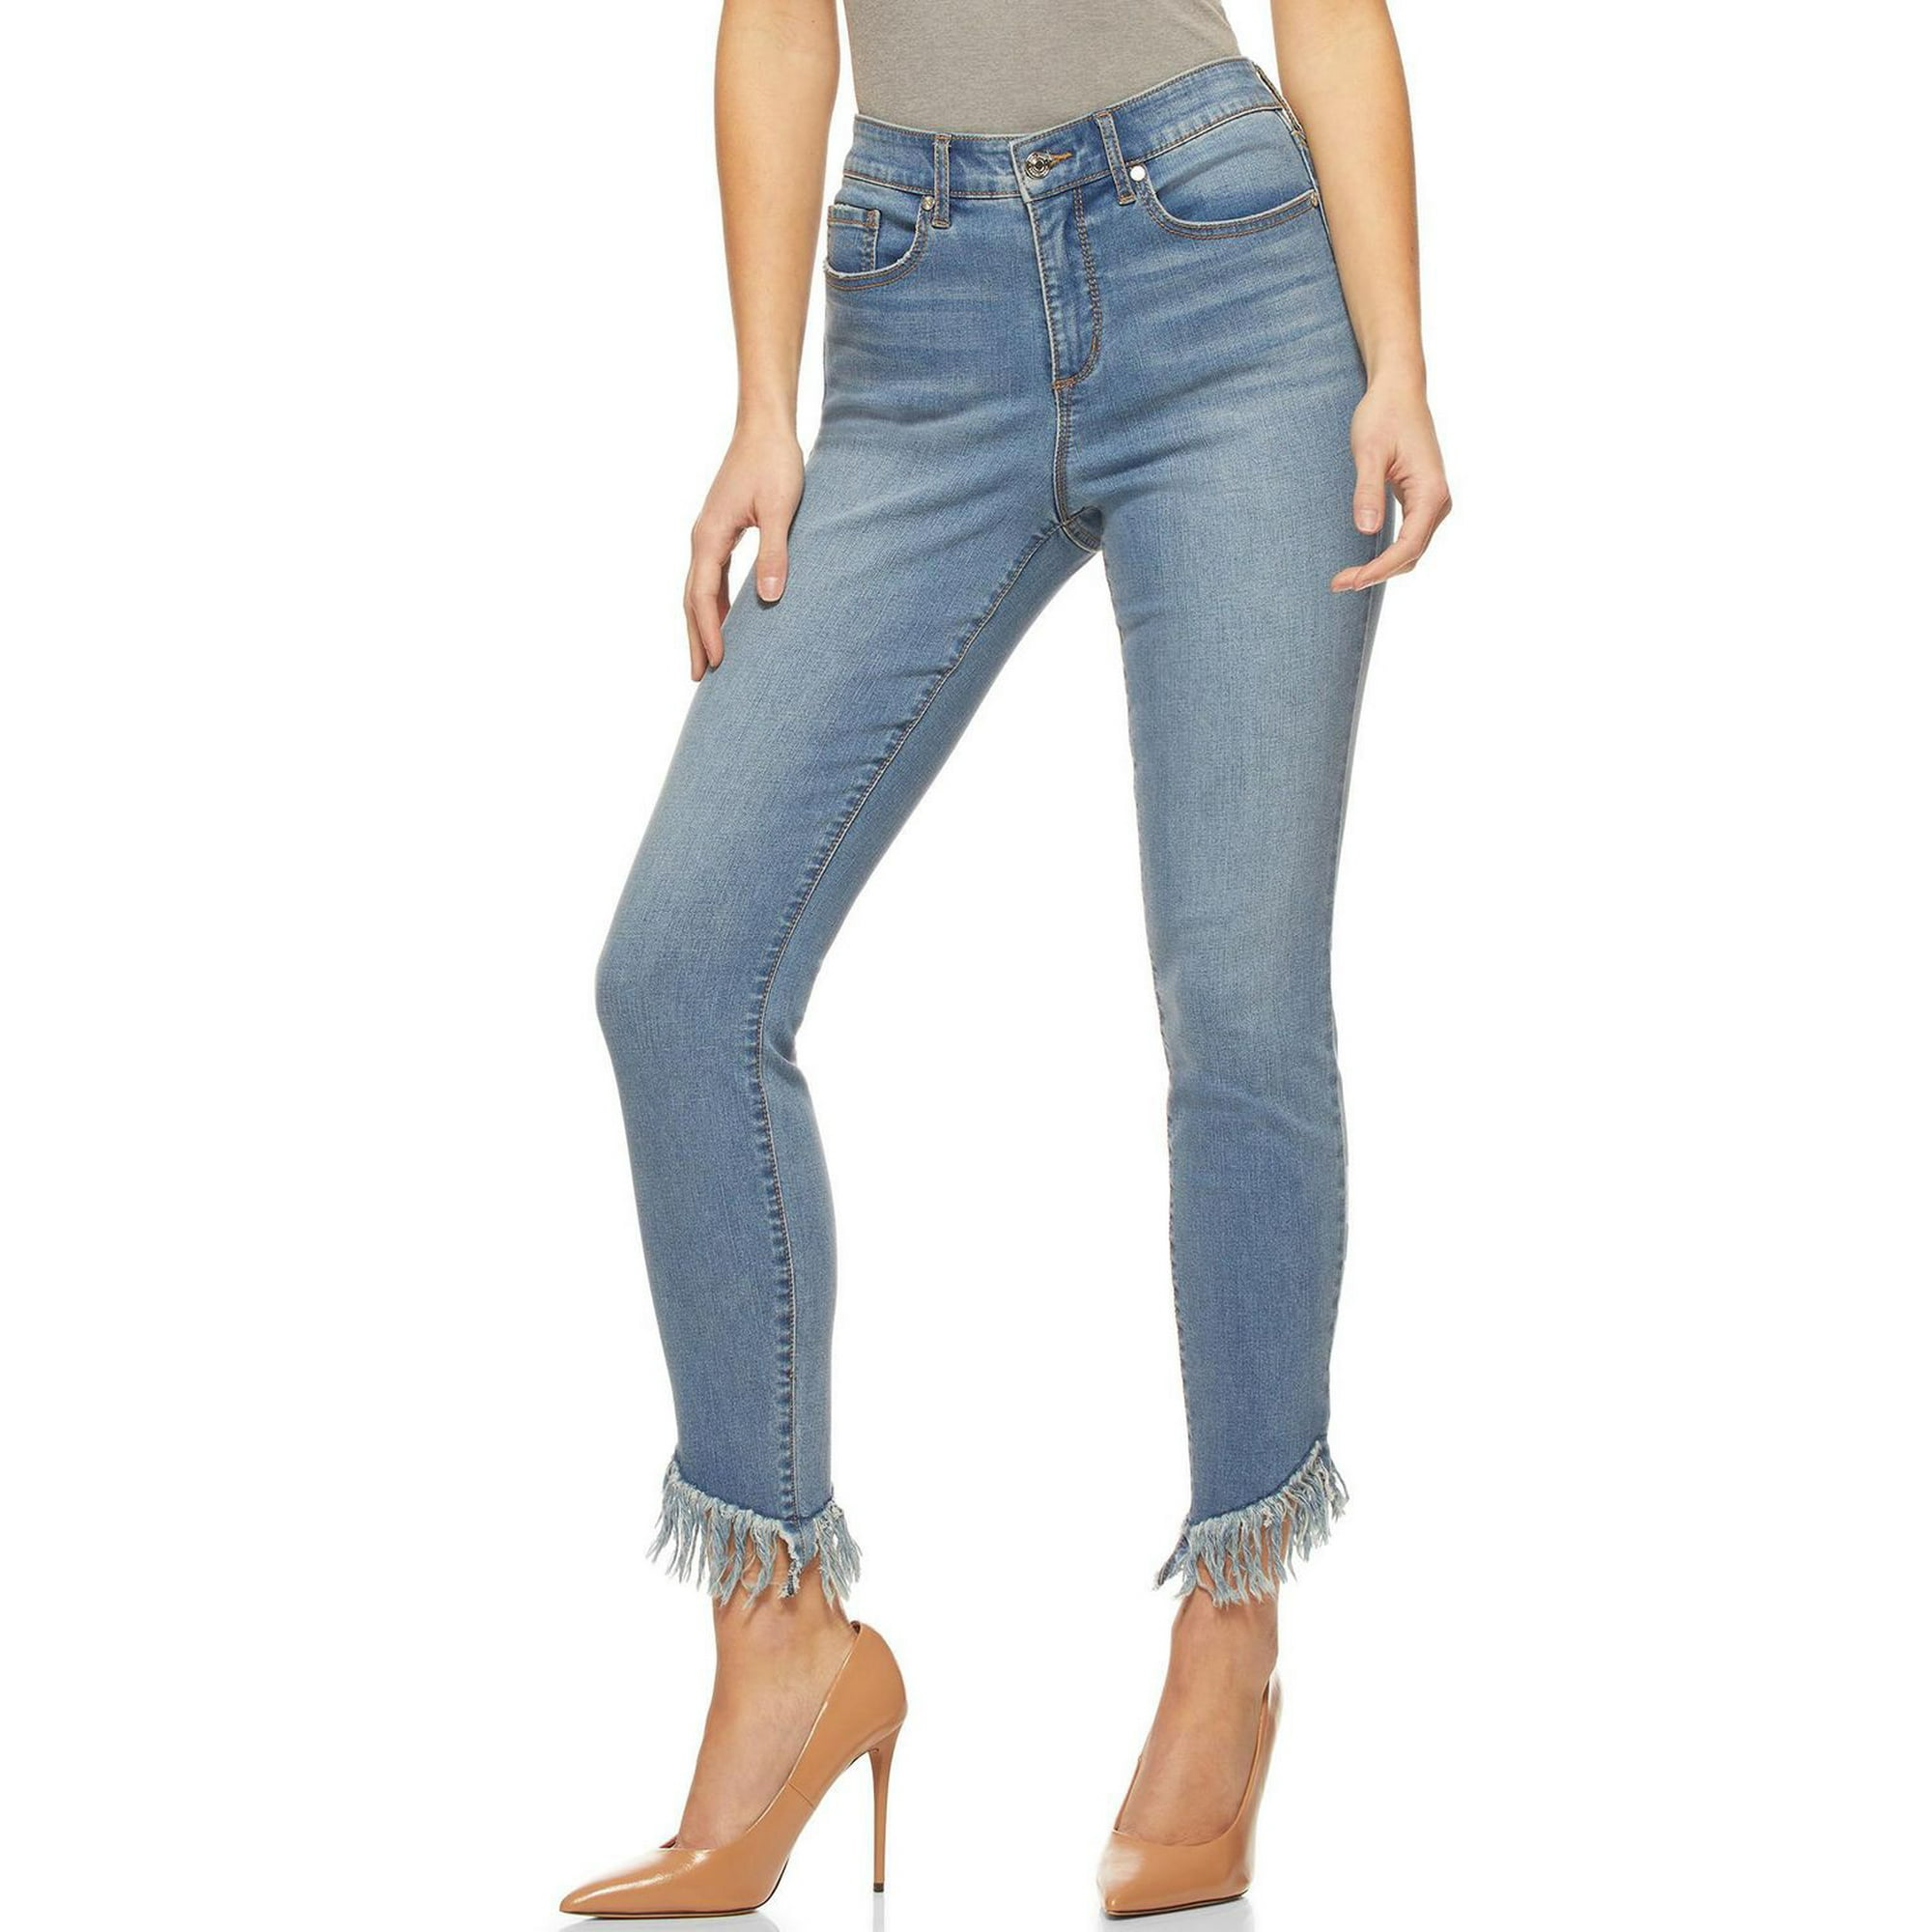 Sofia Vergara Women's Clothes Clearance - Prices Start at $3 - Daily Deals  & Coupons